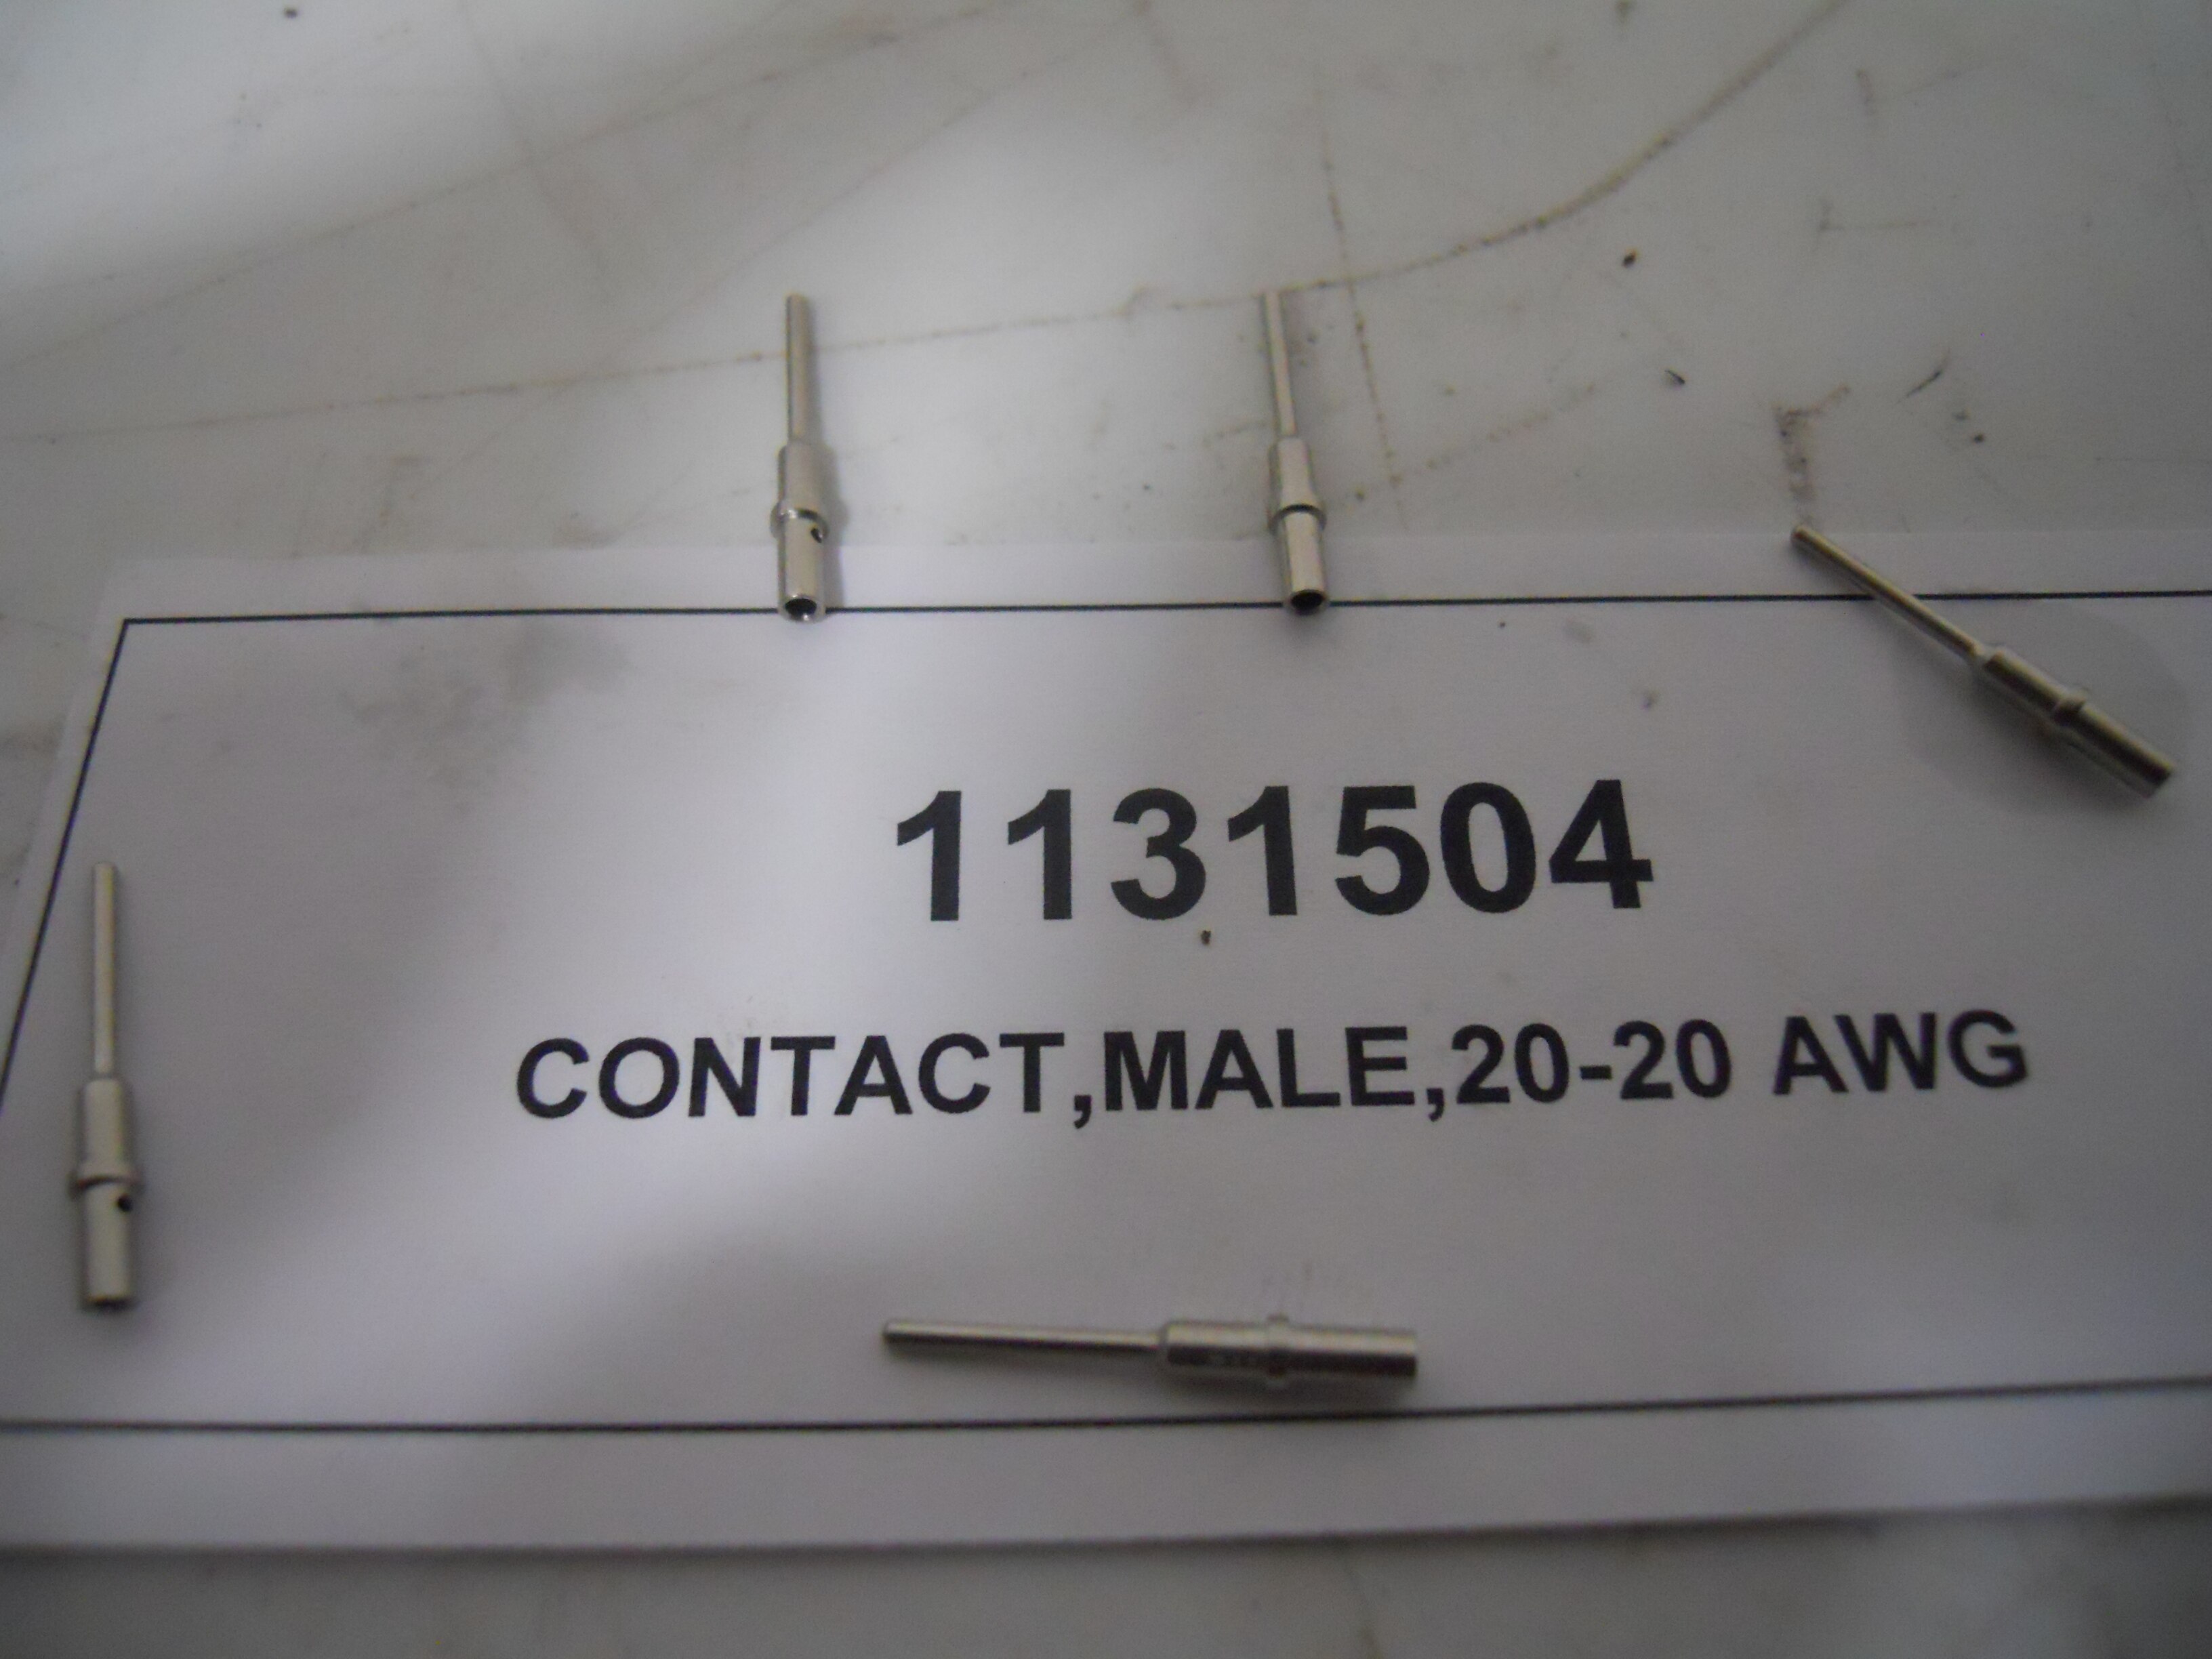 CONTACT,MALE,20-20 AWG